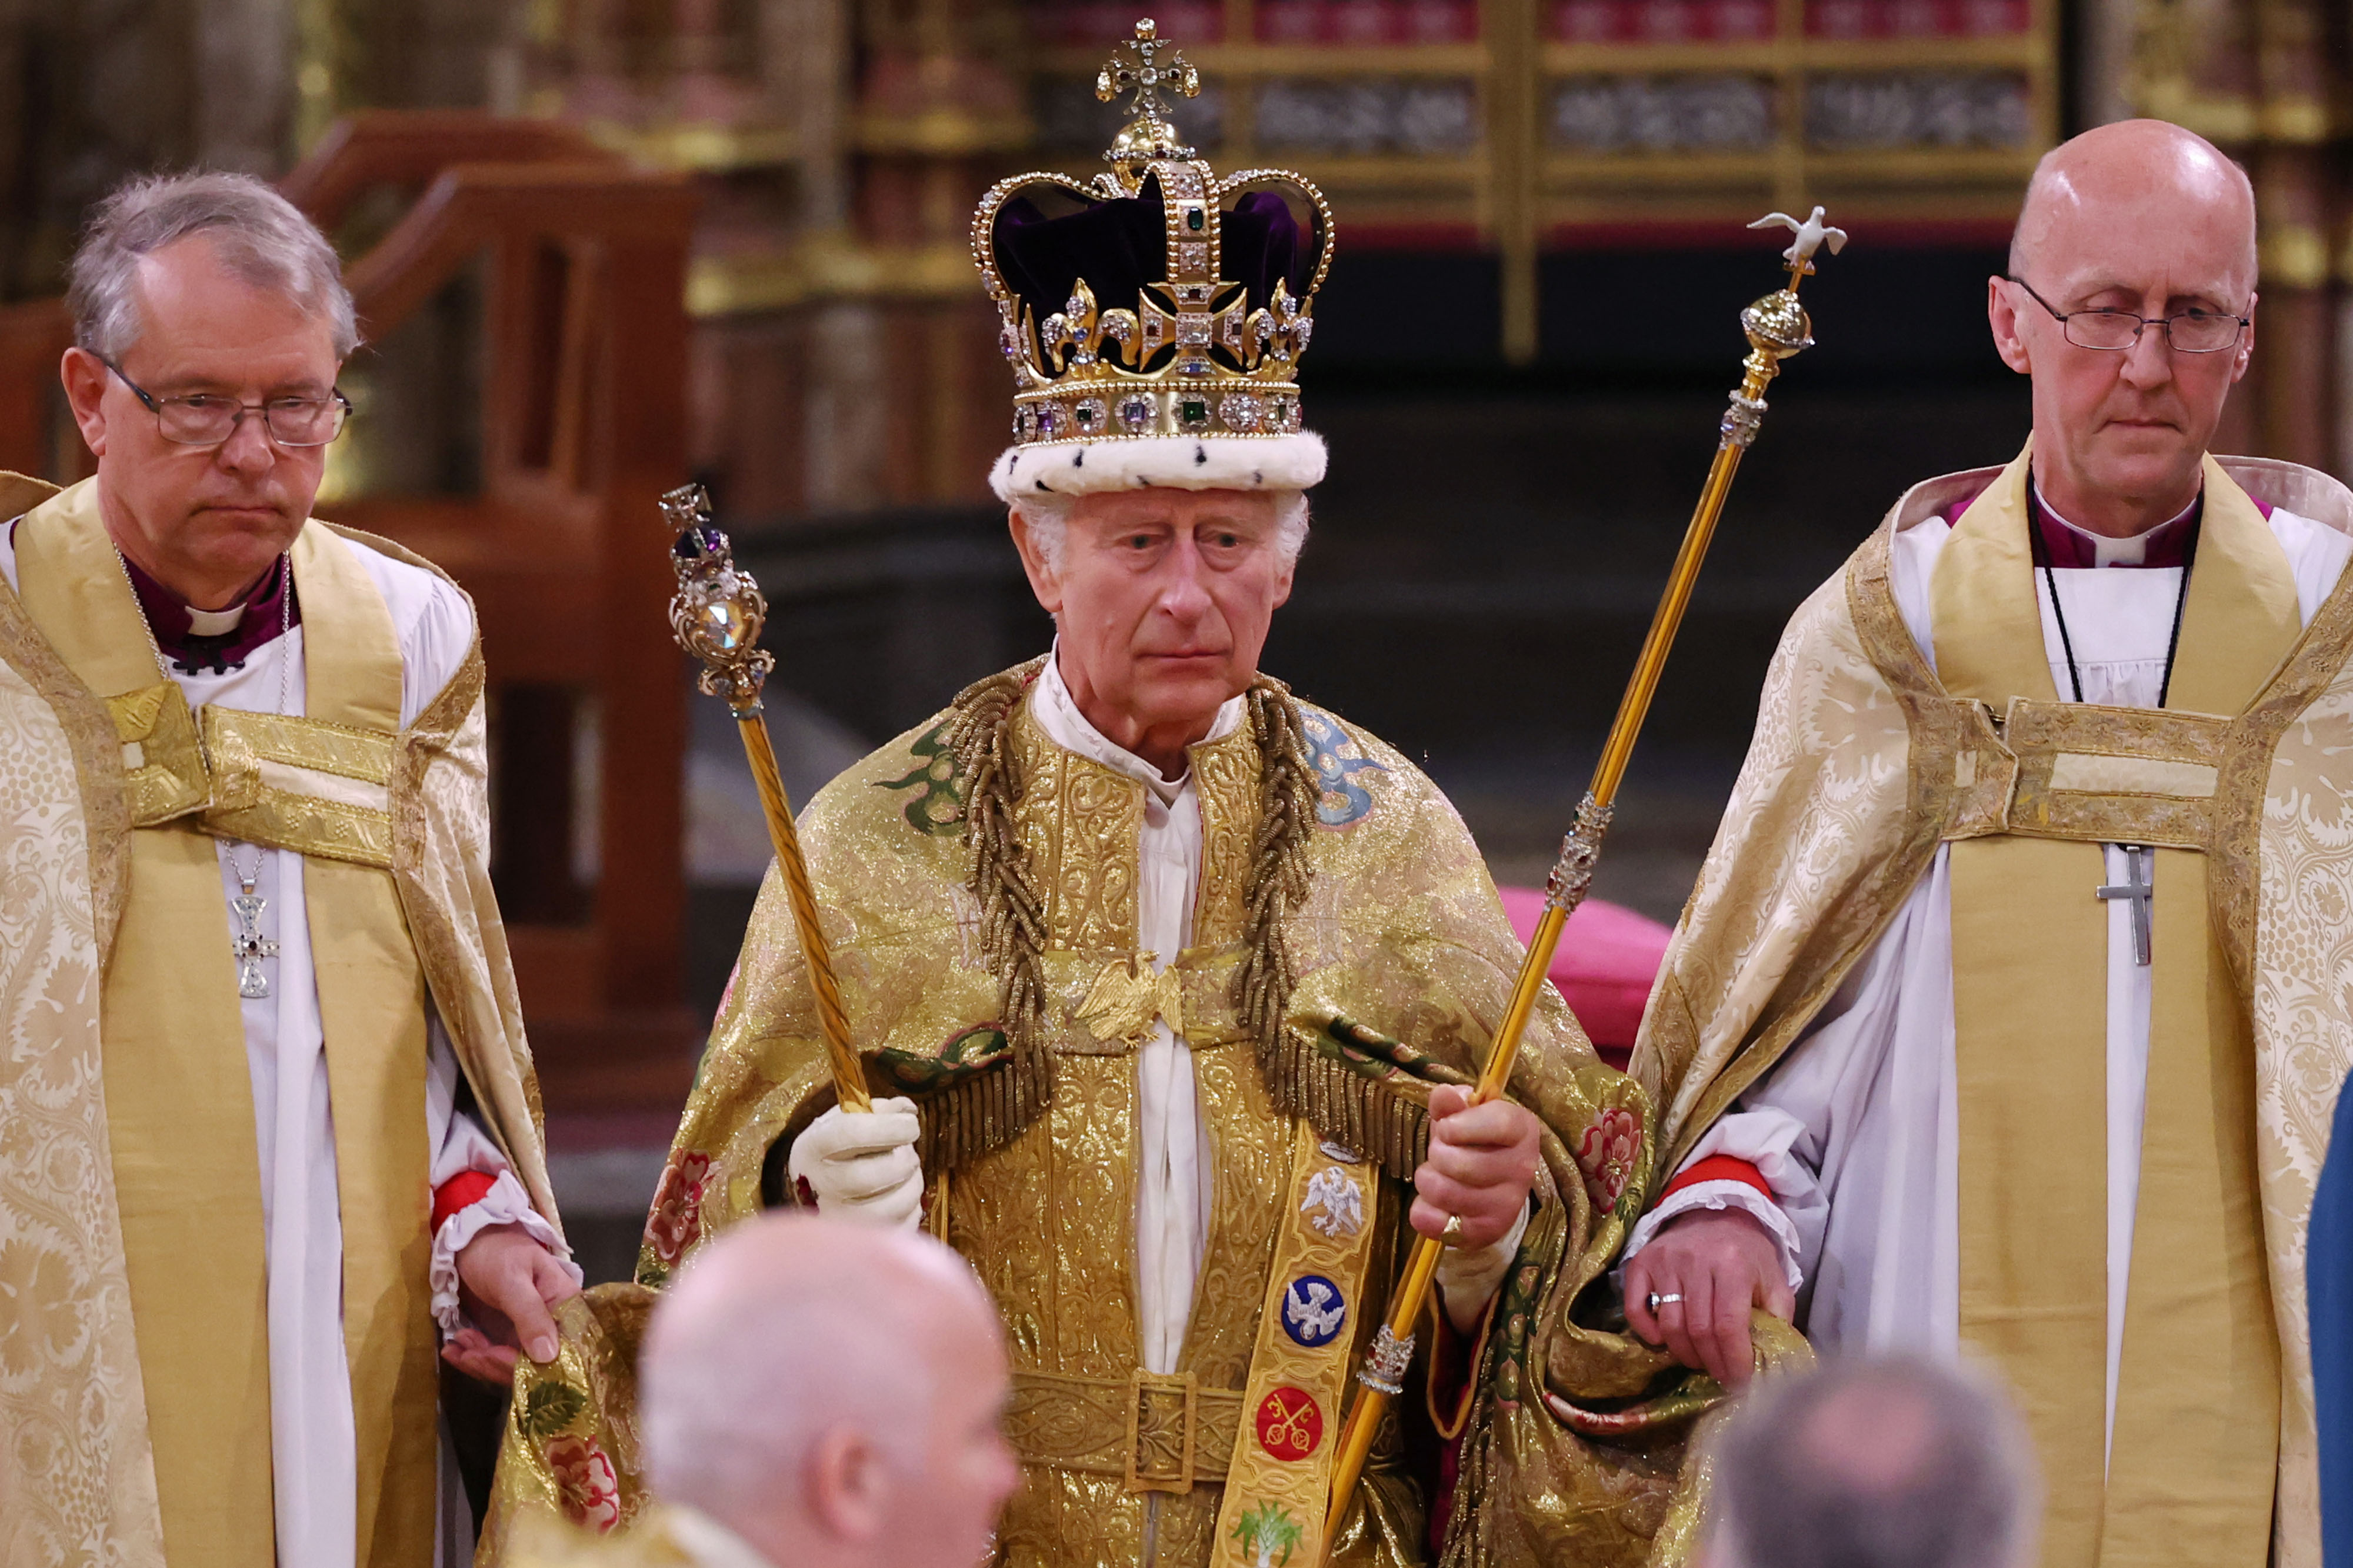 King Charles III during his coronation ceremony on May 06, 2023 in London, England | Source: Getty Images